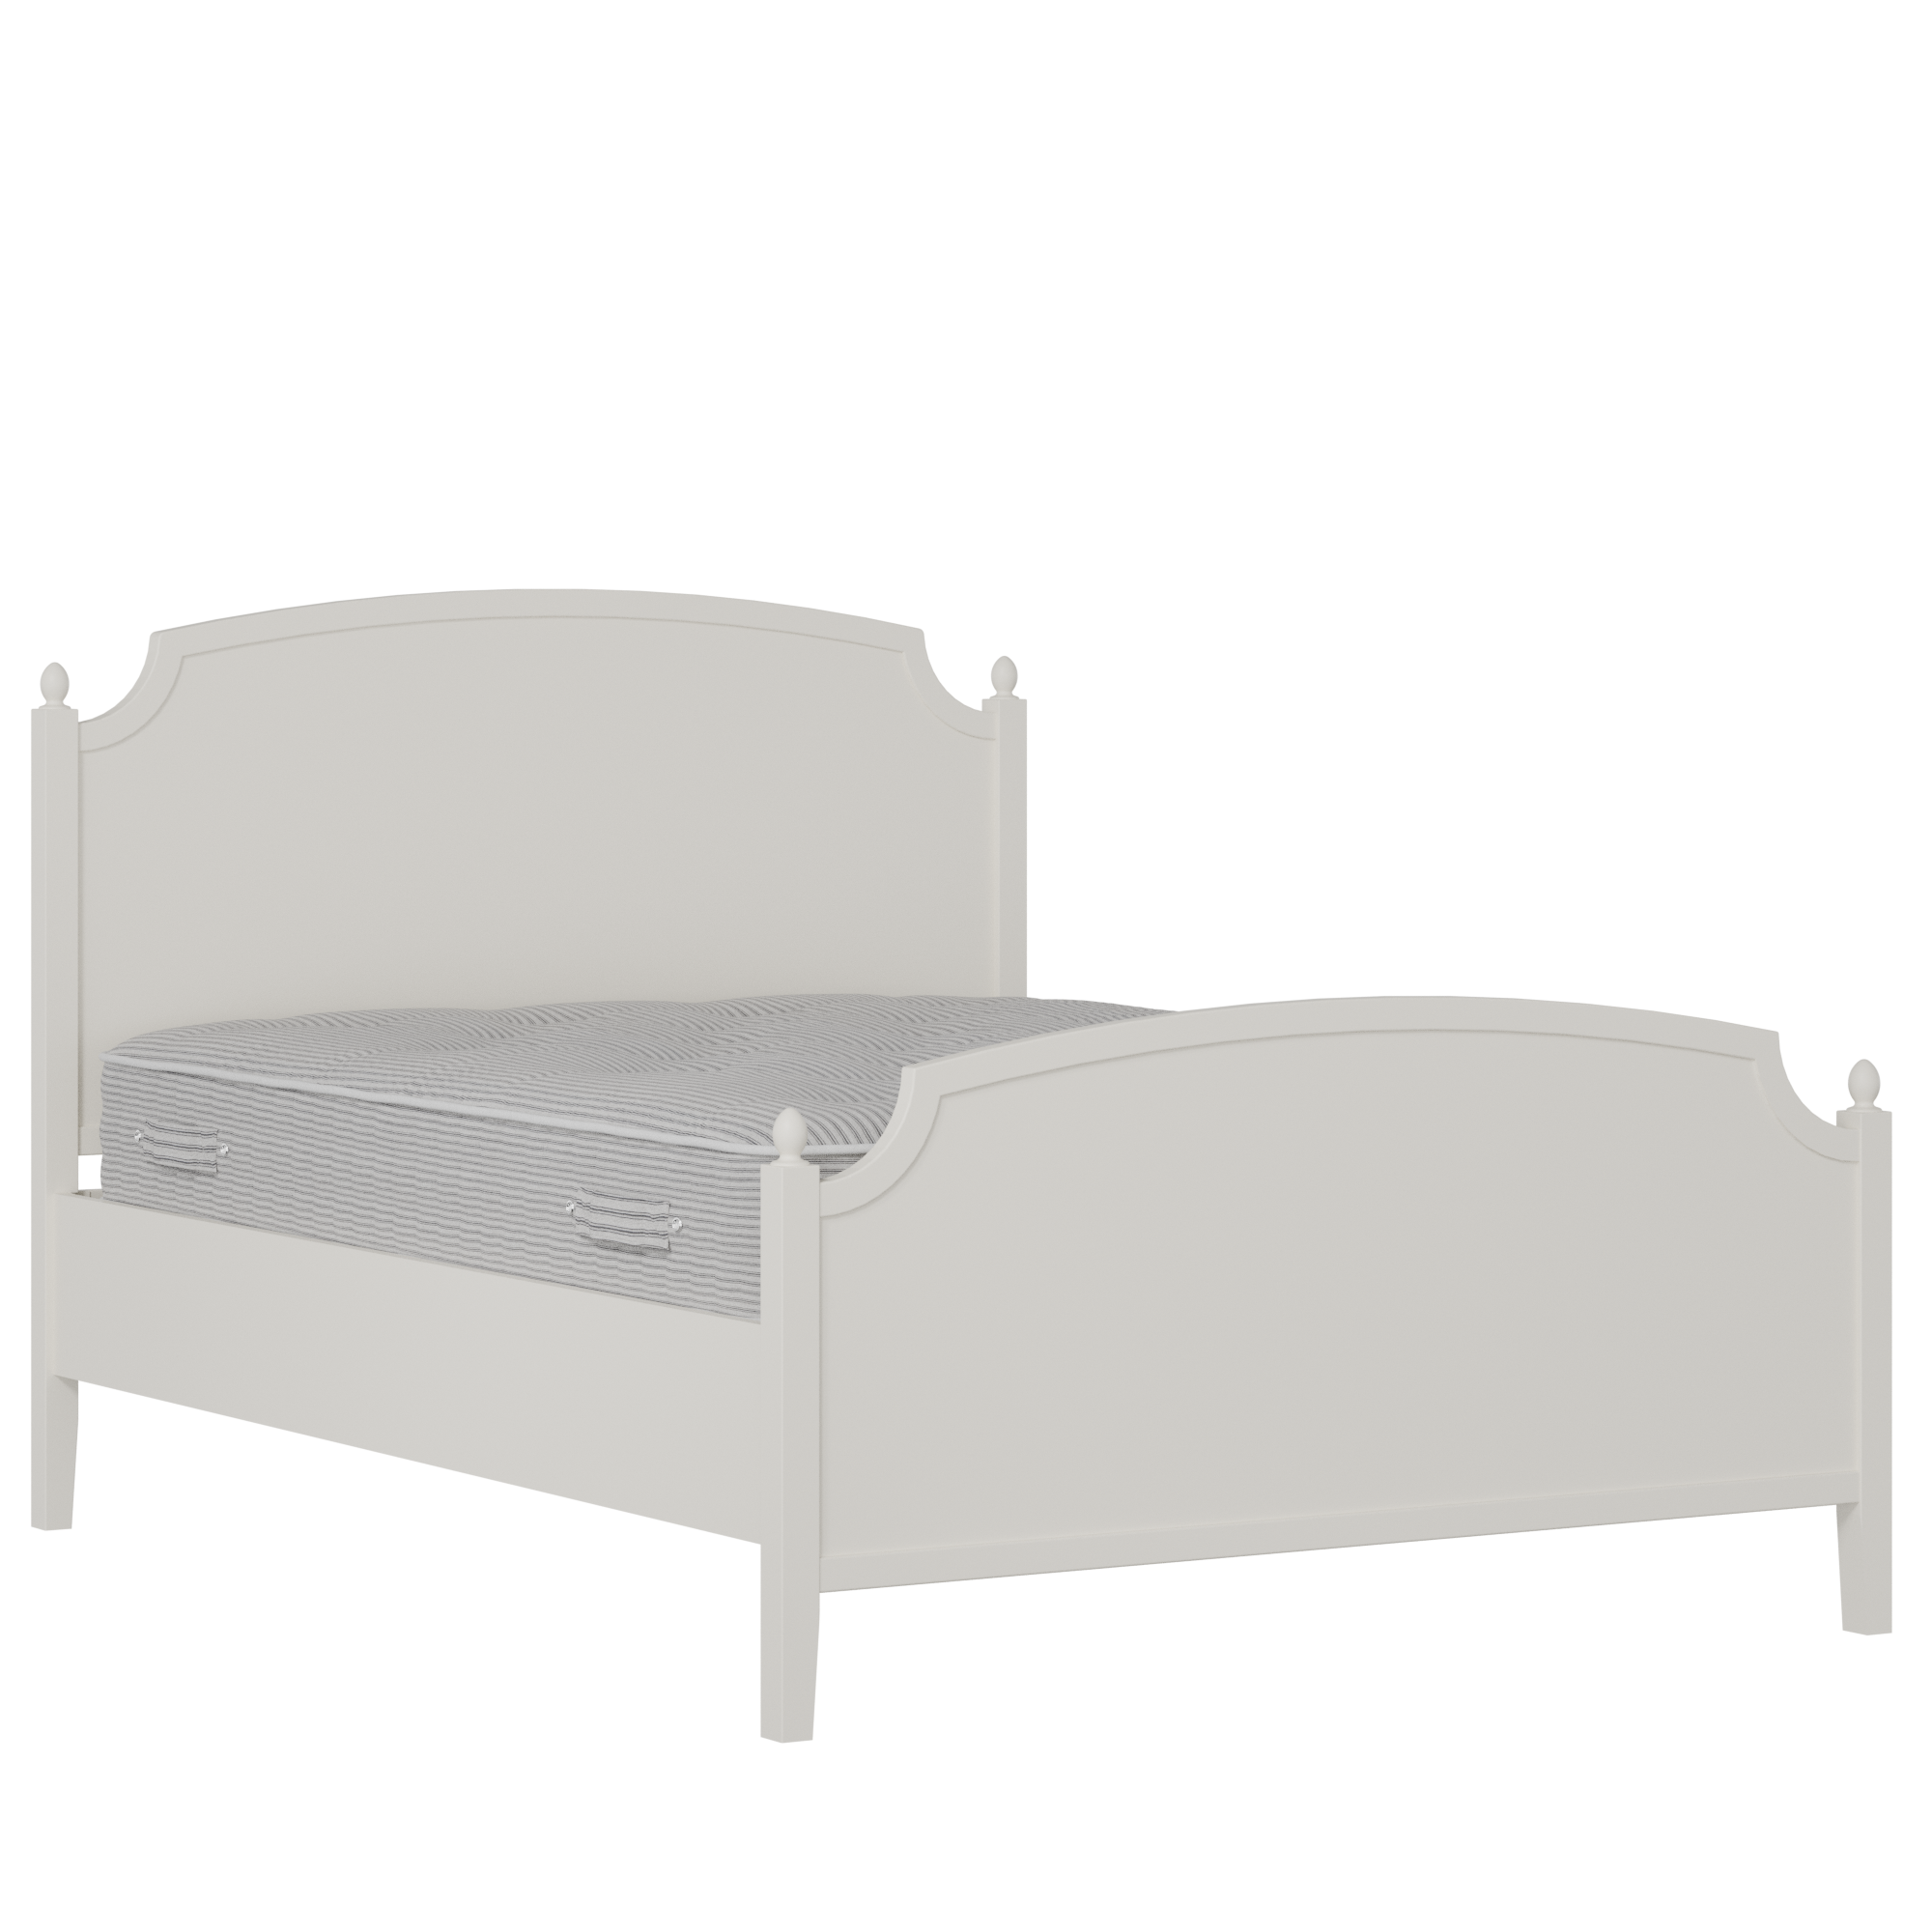 Kipling Painted painted wood bed in white with Juno mattress